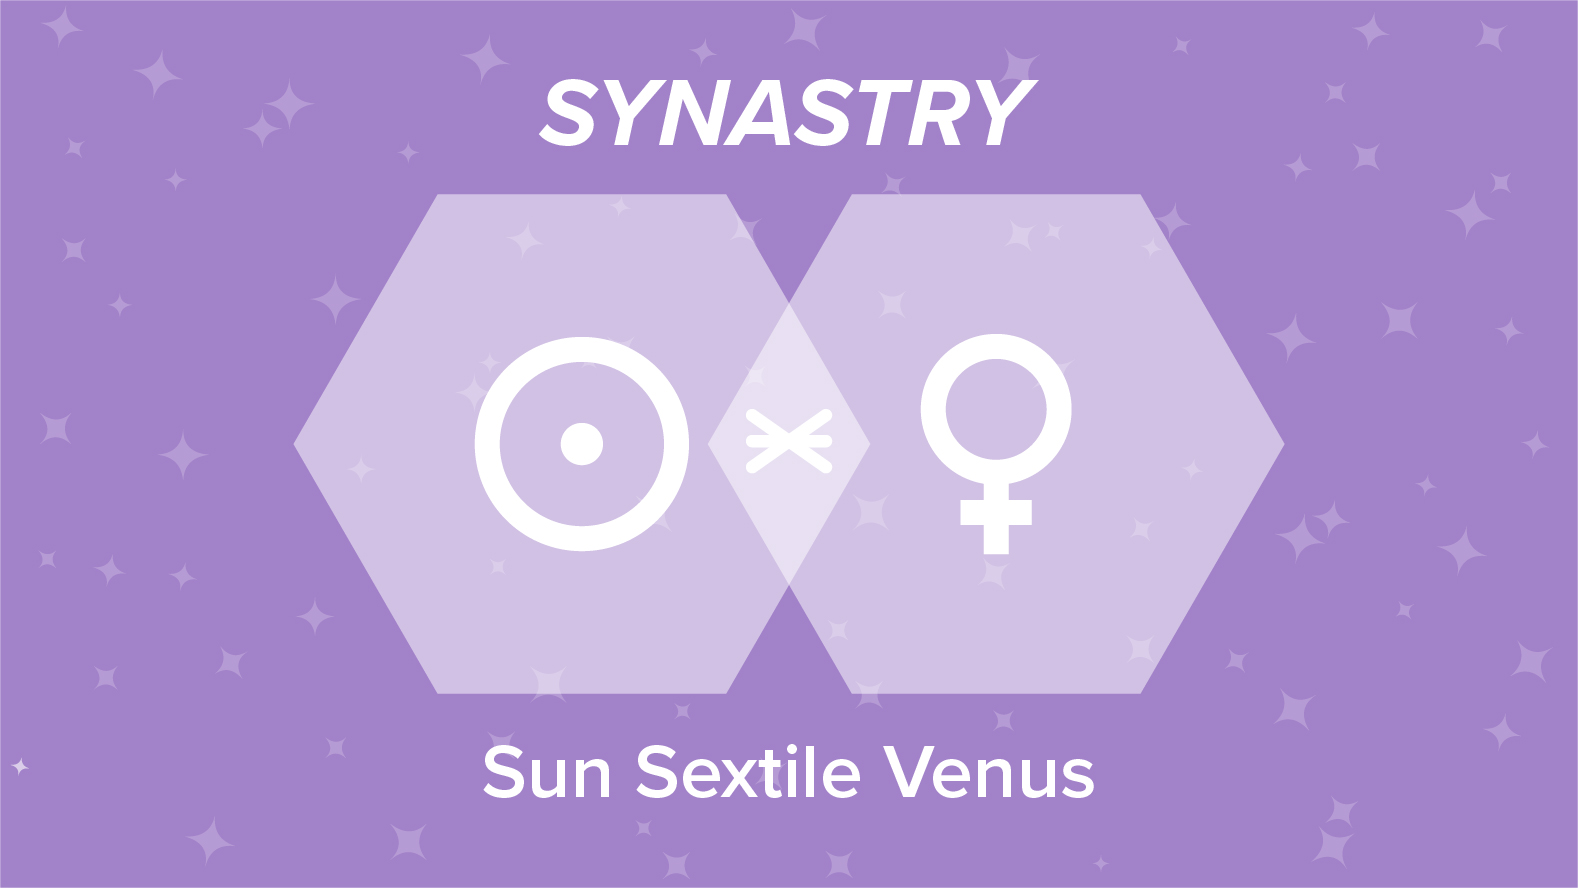 Sun Sextile Venus Synastry: Relationships and Friendships Explained